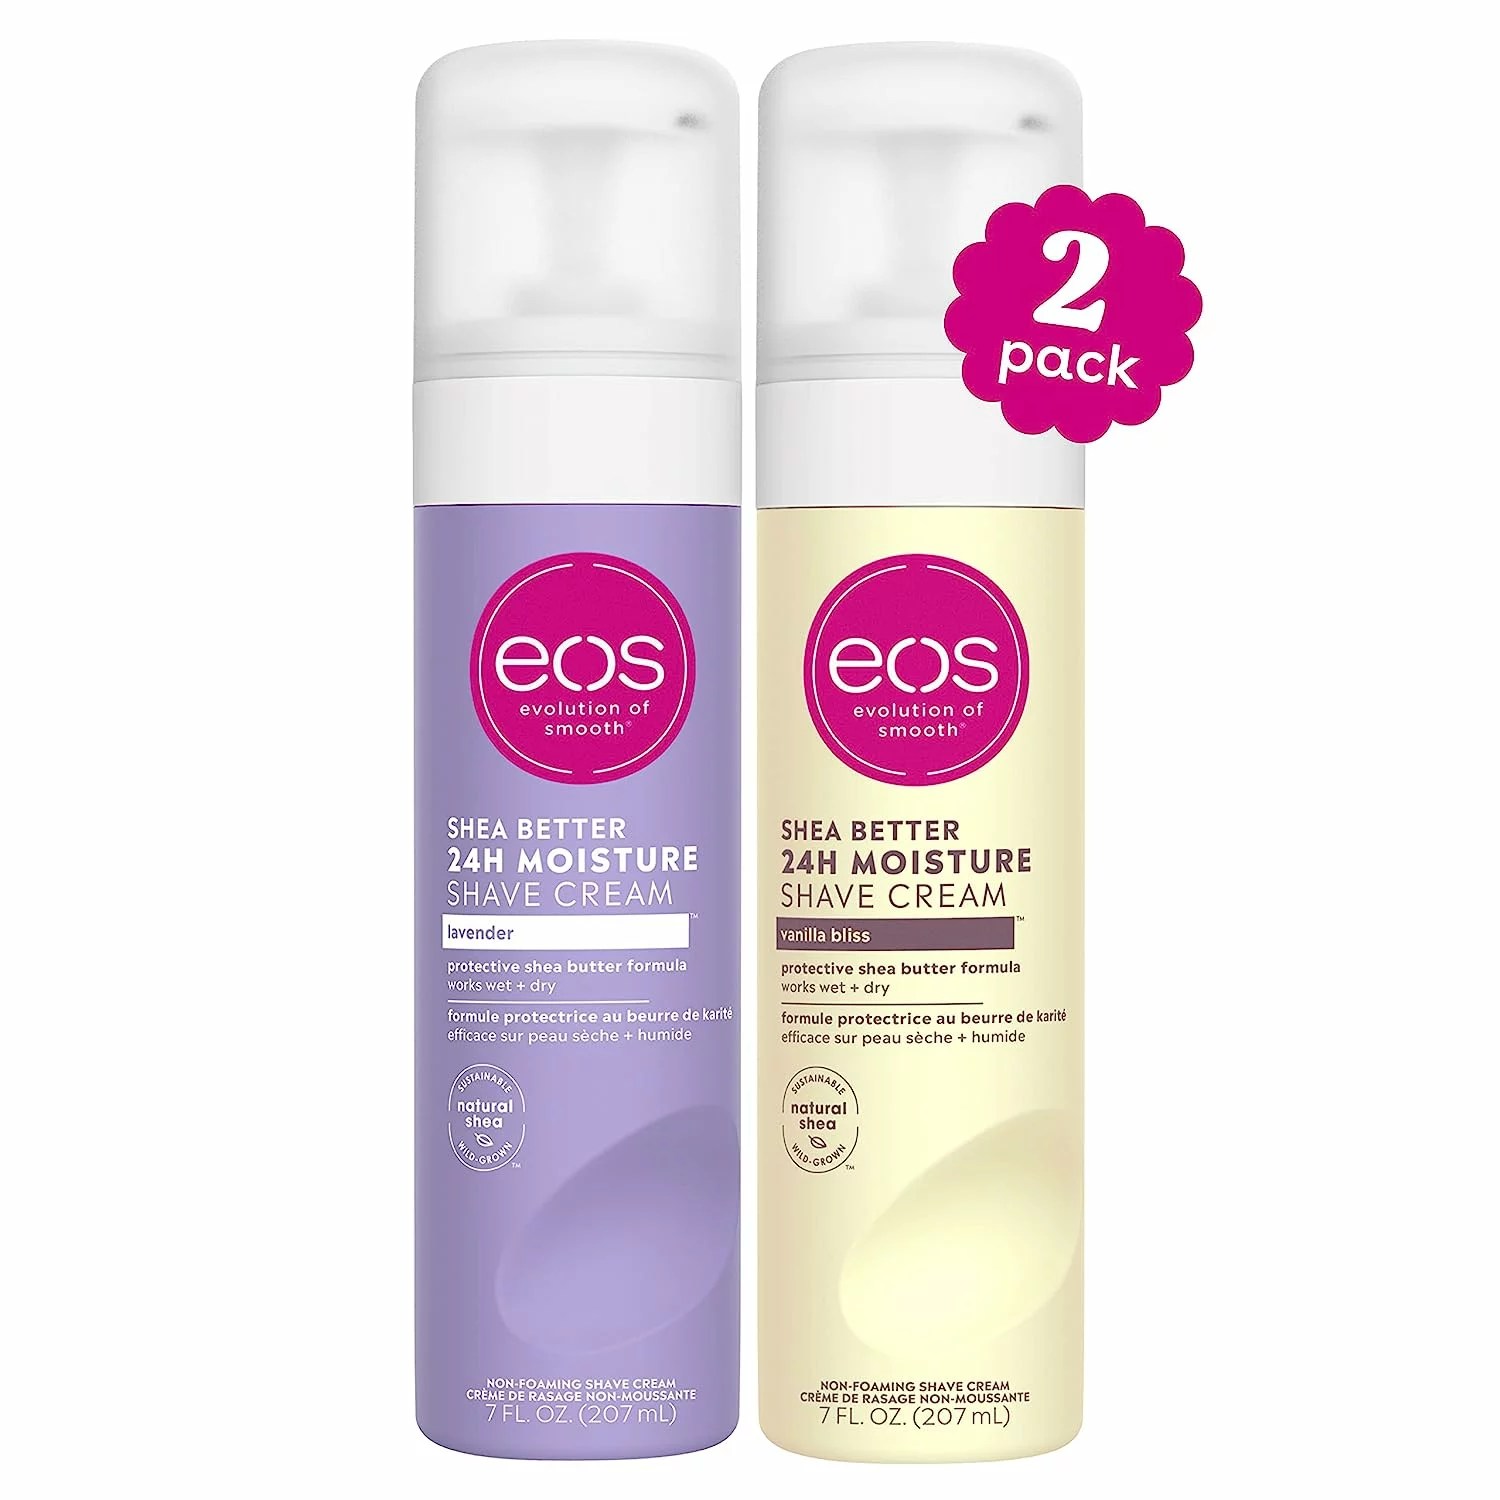 Two bottles of eos shea butter shaving cream on sale for prime big deal days